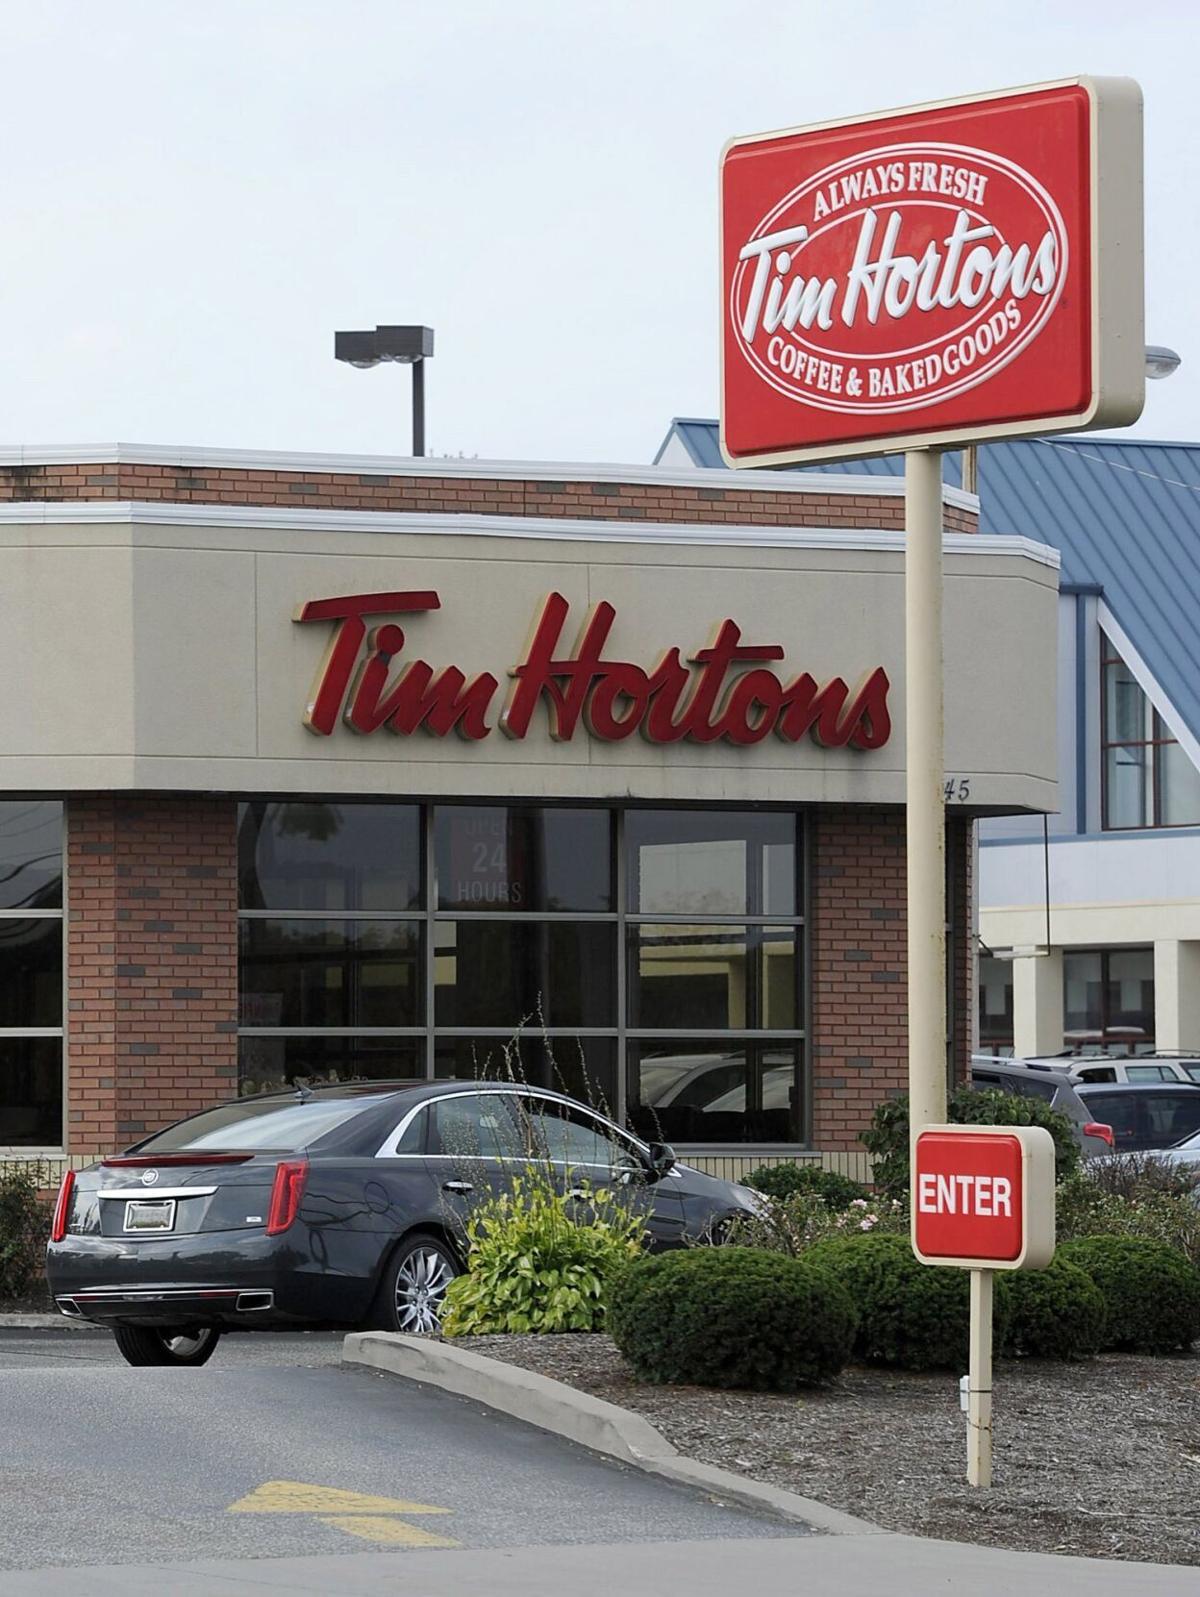 Canadian chain Tim Hortons scouting locations for DFW move